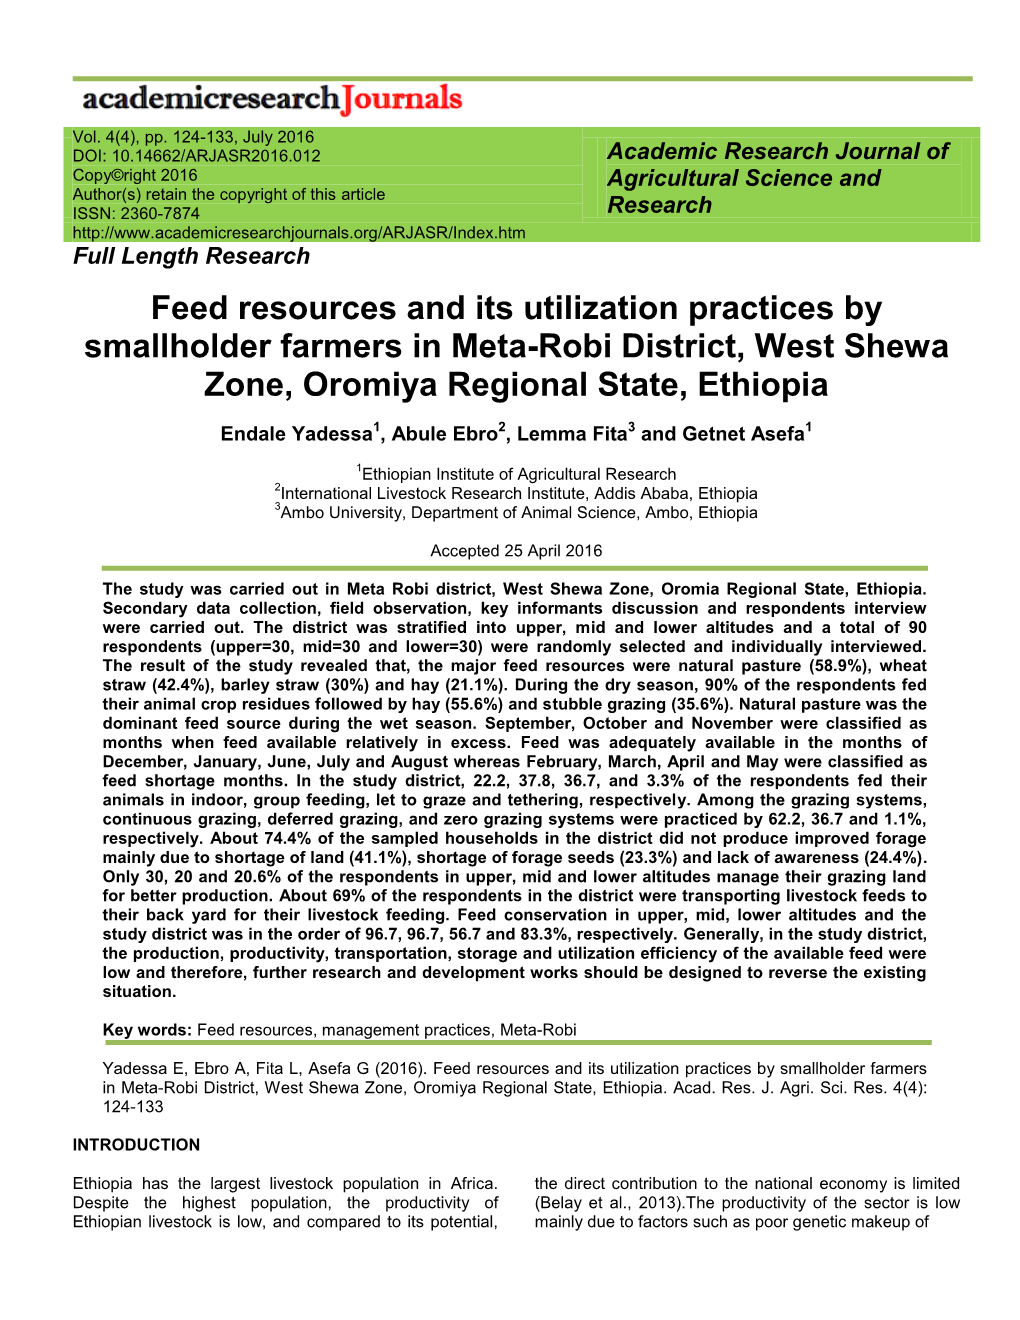 Feed Resources and Its Utilization Practices by Smallholder Farmers in Meta-Robi District, West Shewa Zone, Oromiya Regional State, Ethiopia